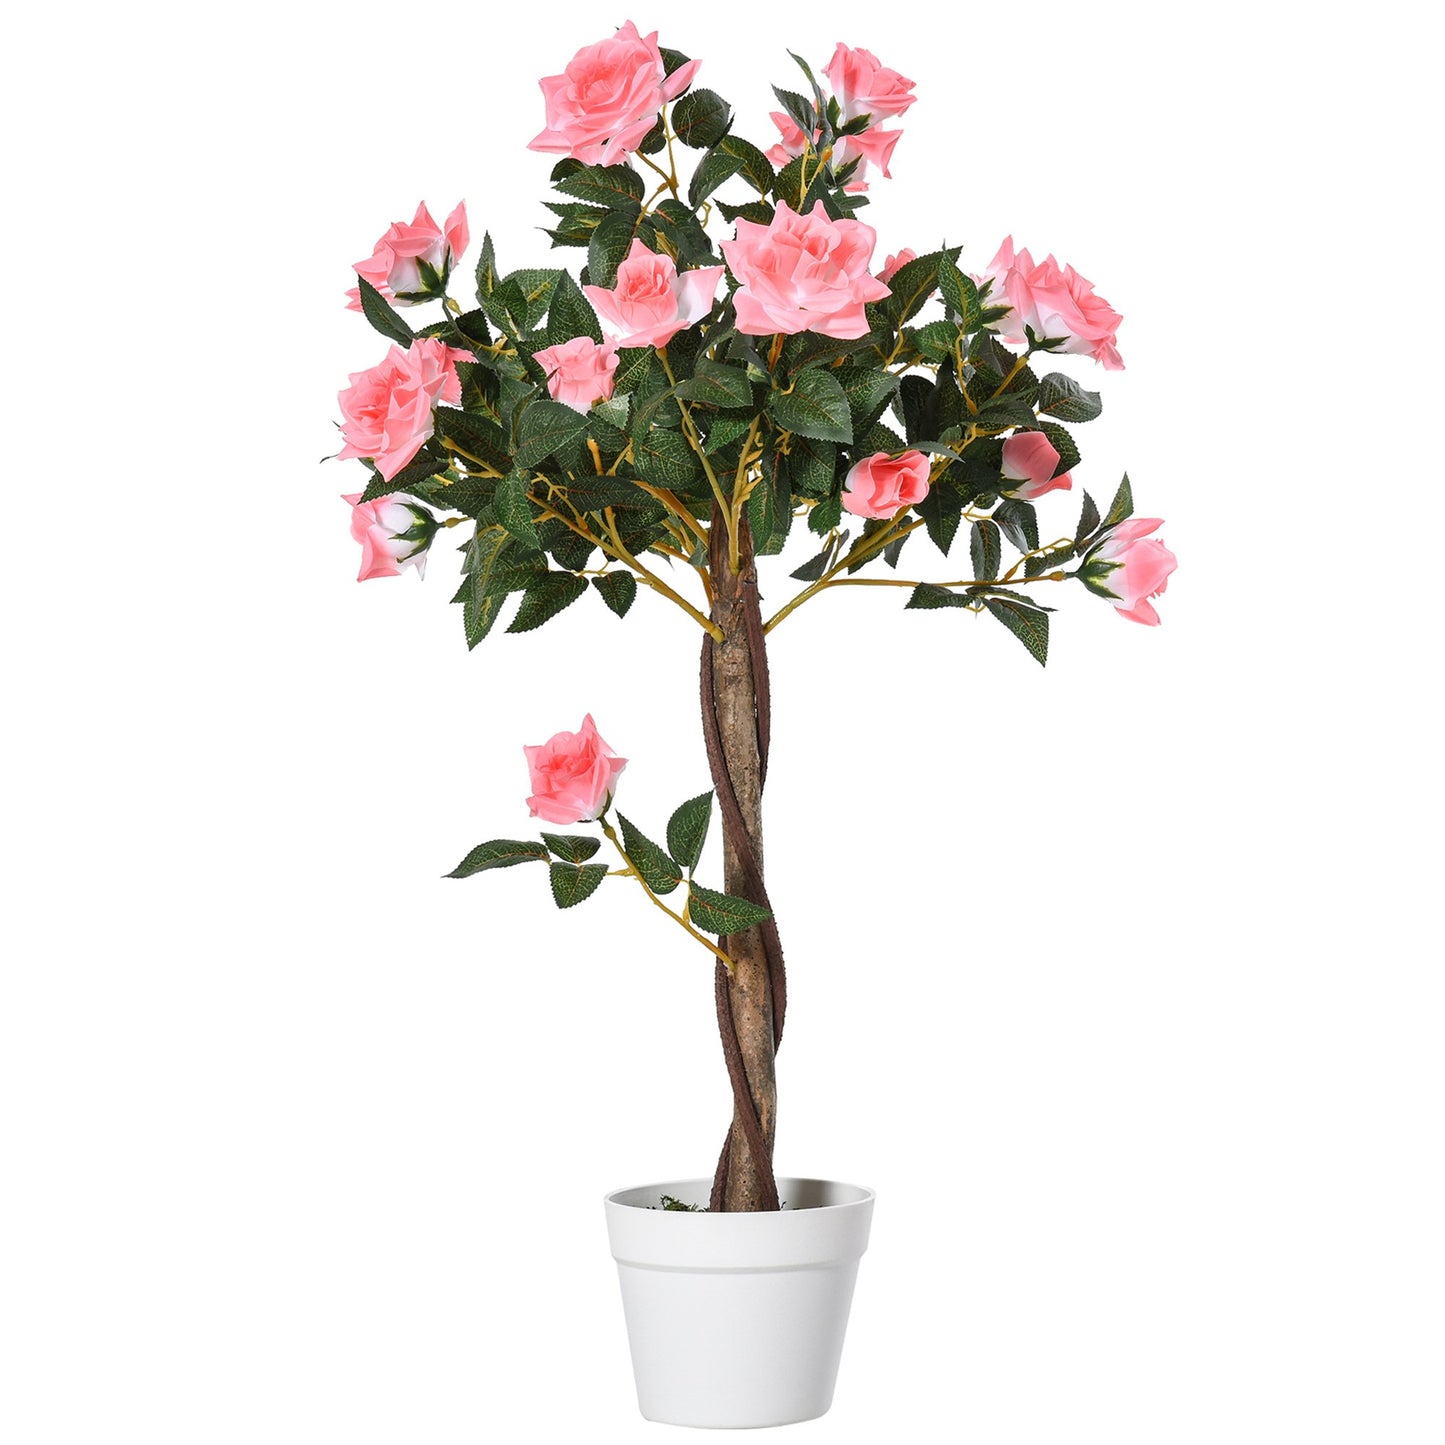 Outsunny Artificial Camellia Plant Realistic Fake Tree Potted Home Office 90cm Pink